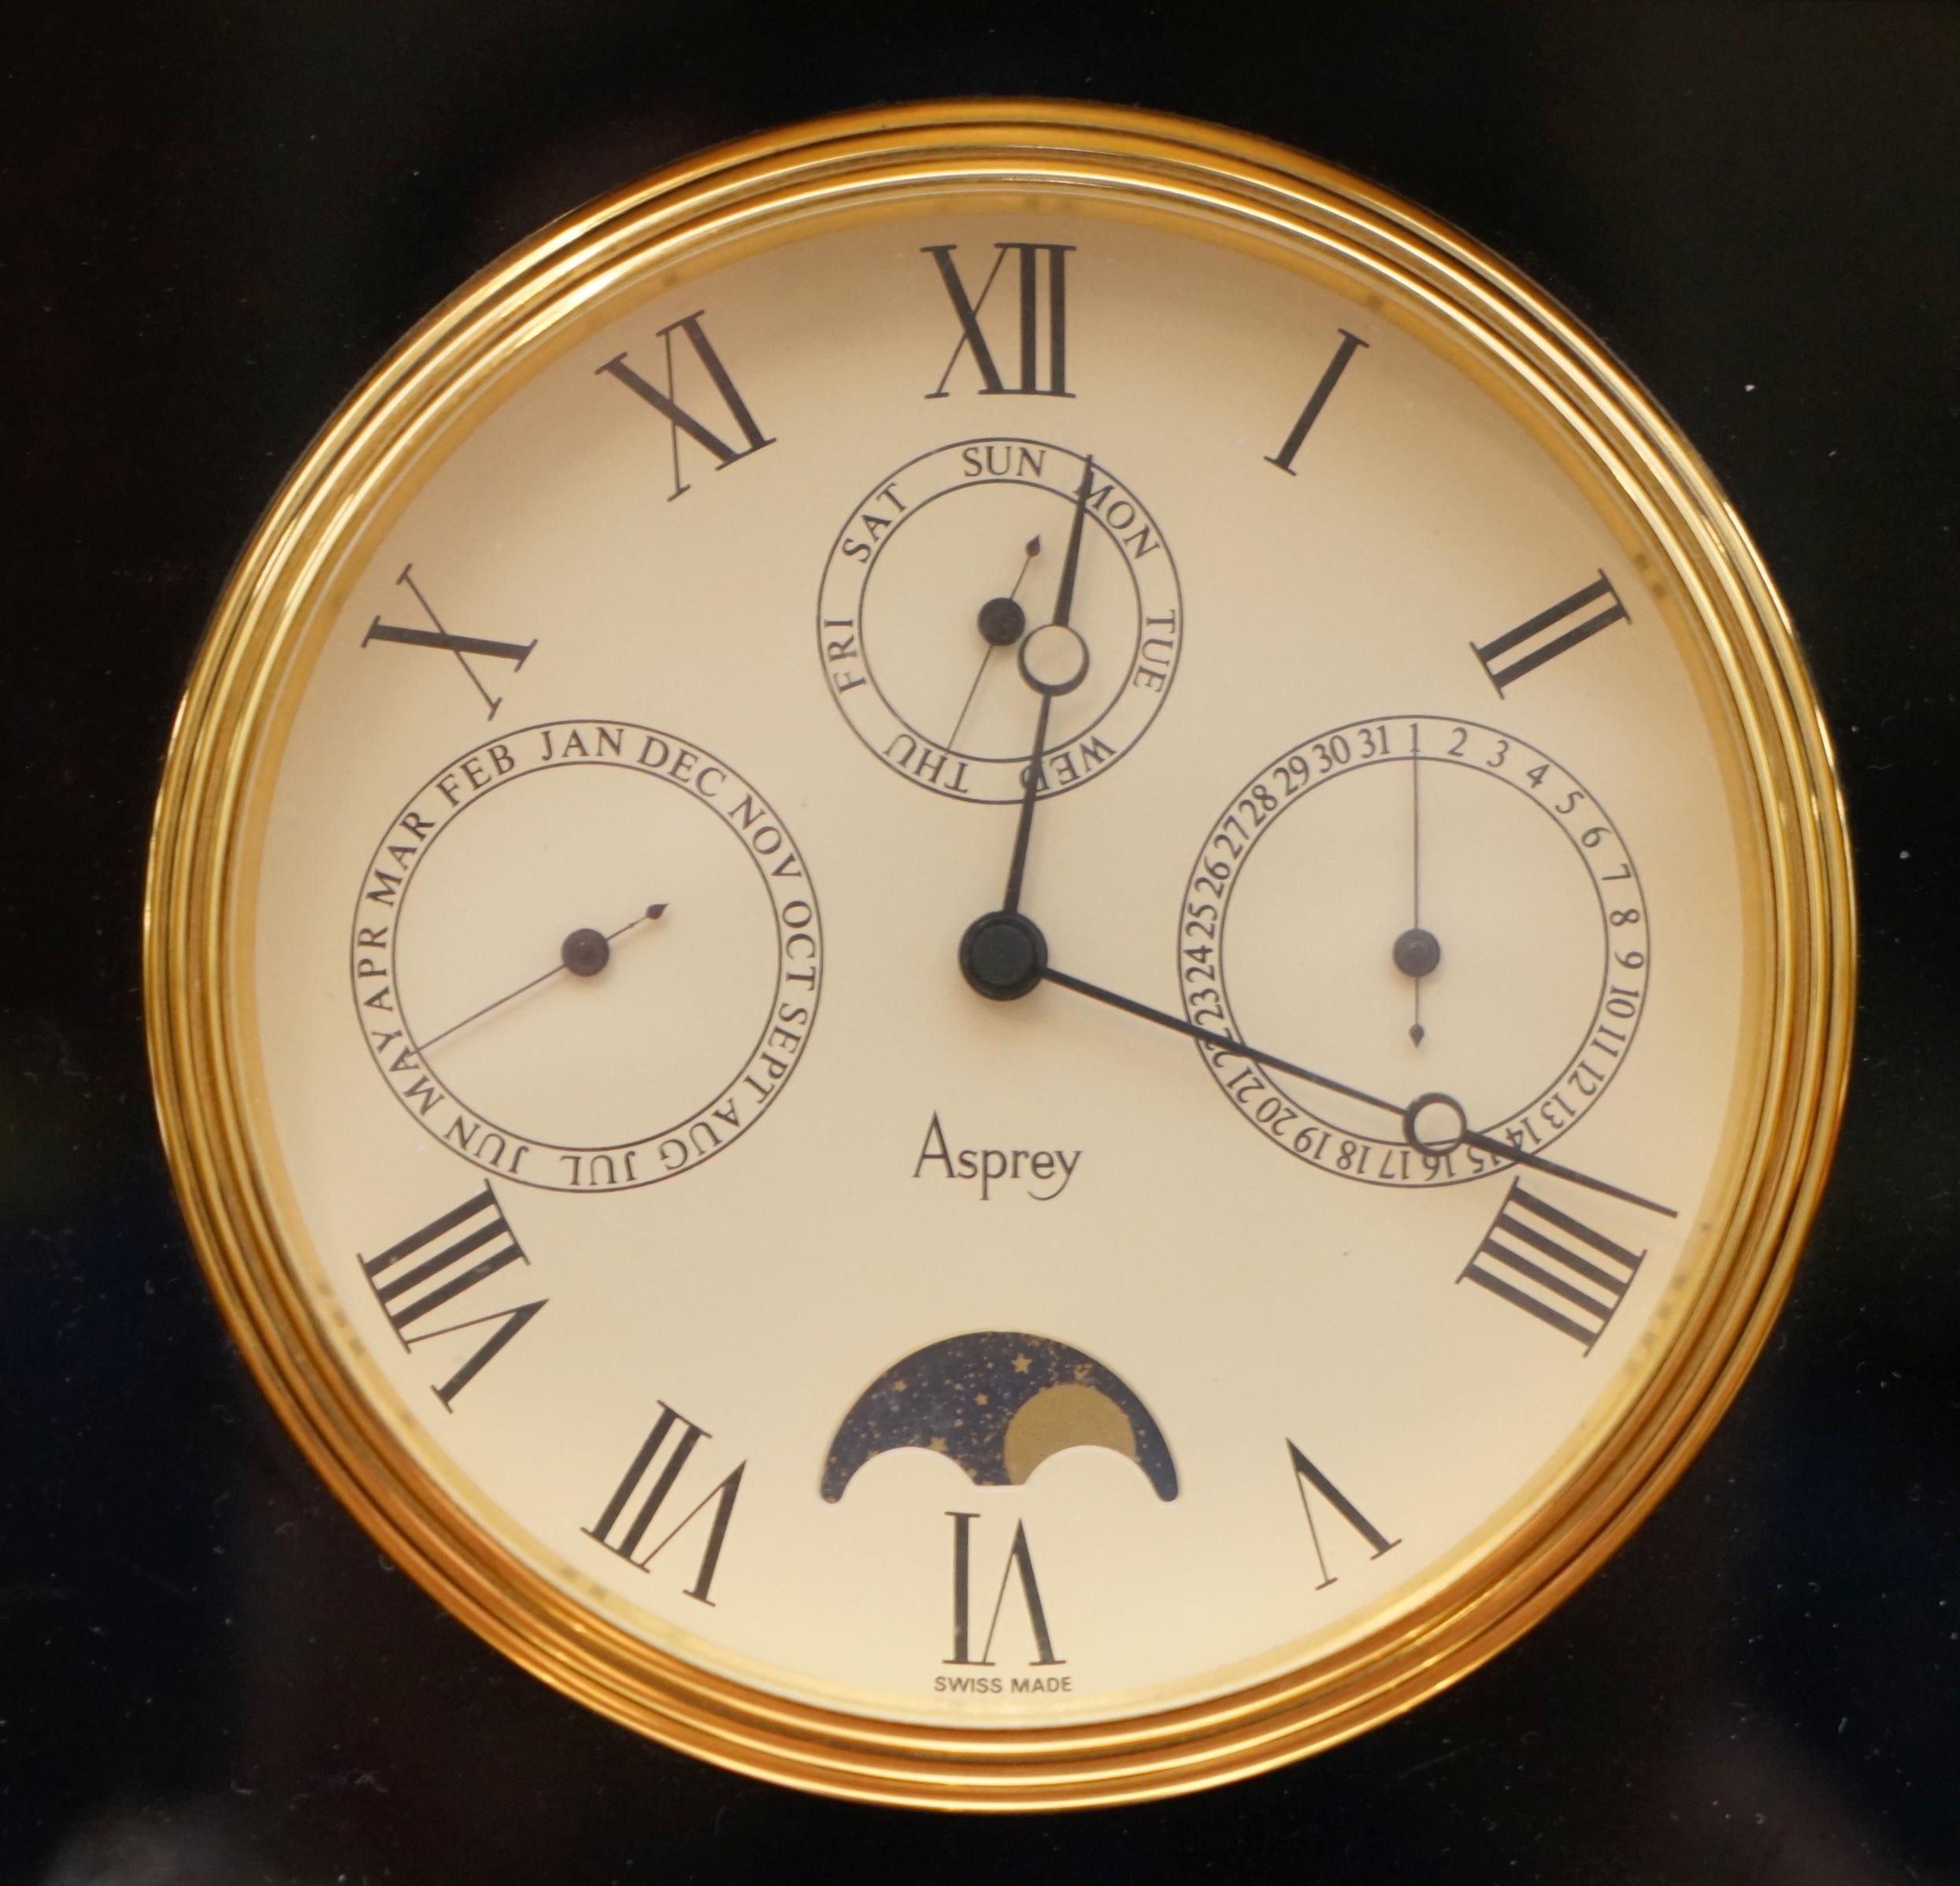 Hand-Crafted Rare Find Asprey London Swiss Made Moon Phase Clock with Barometer and Calendar